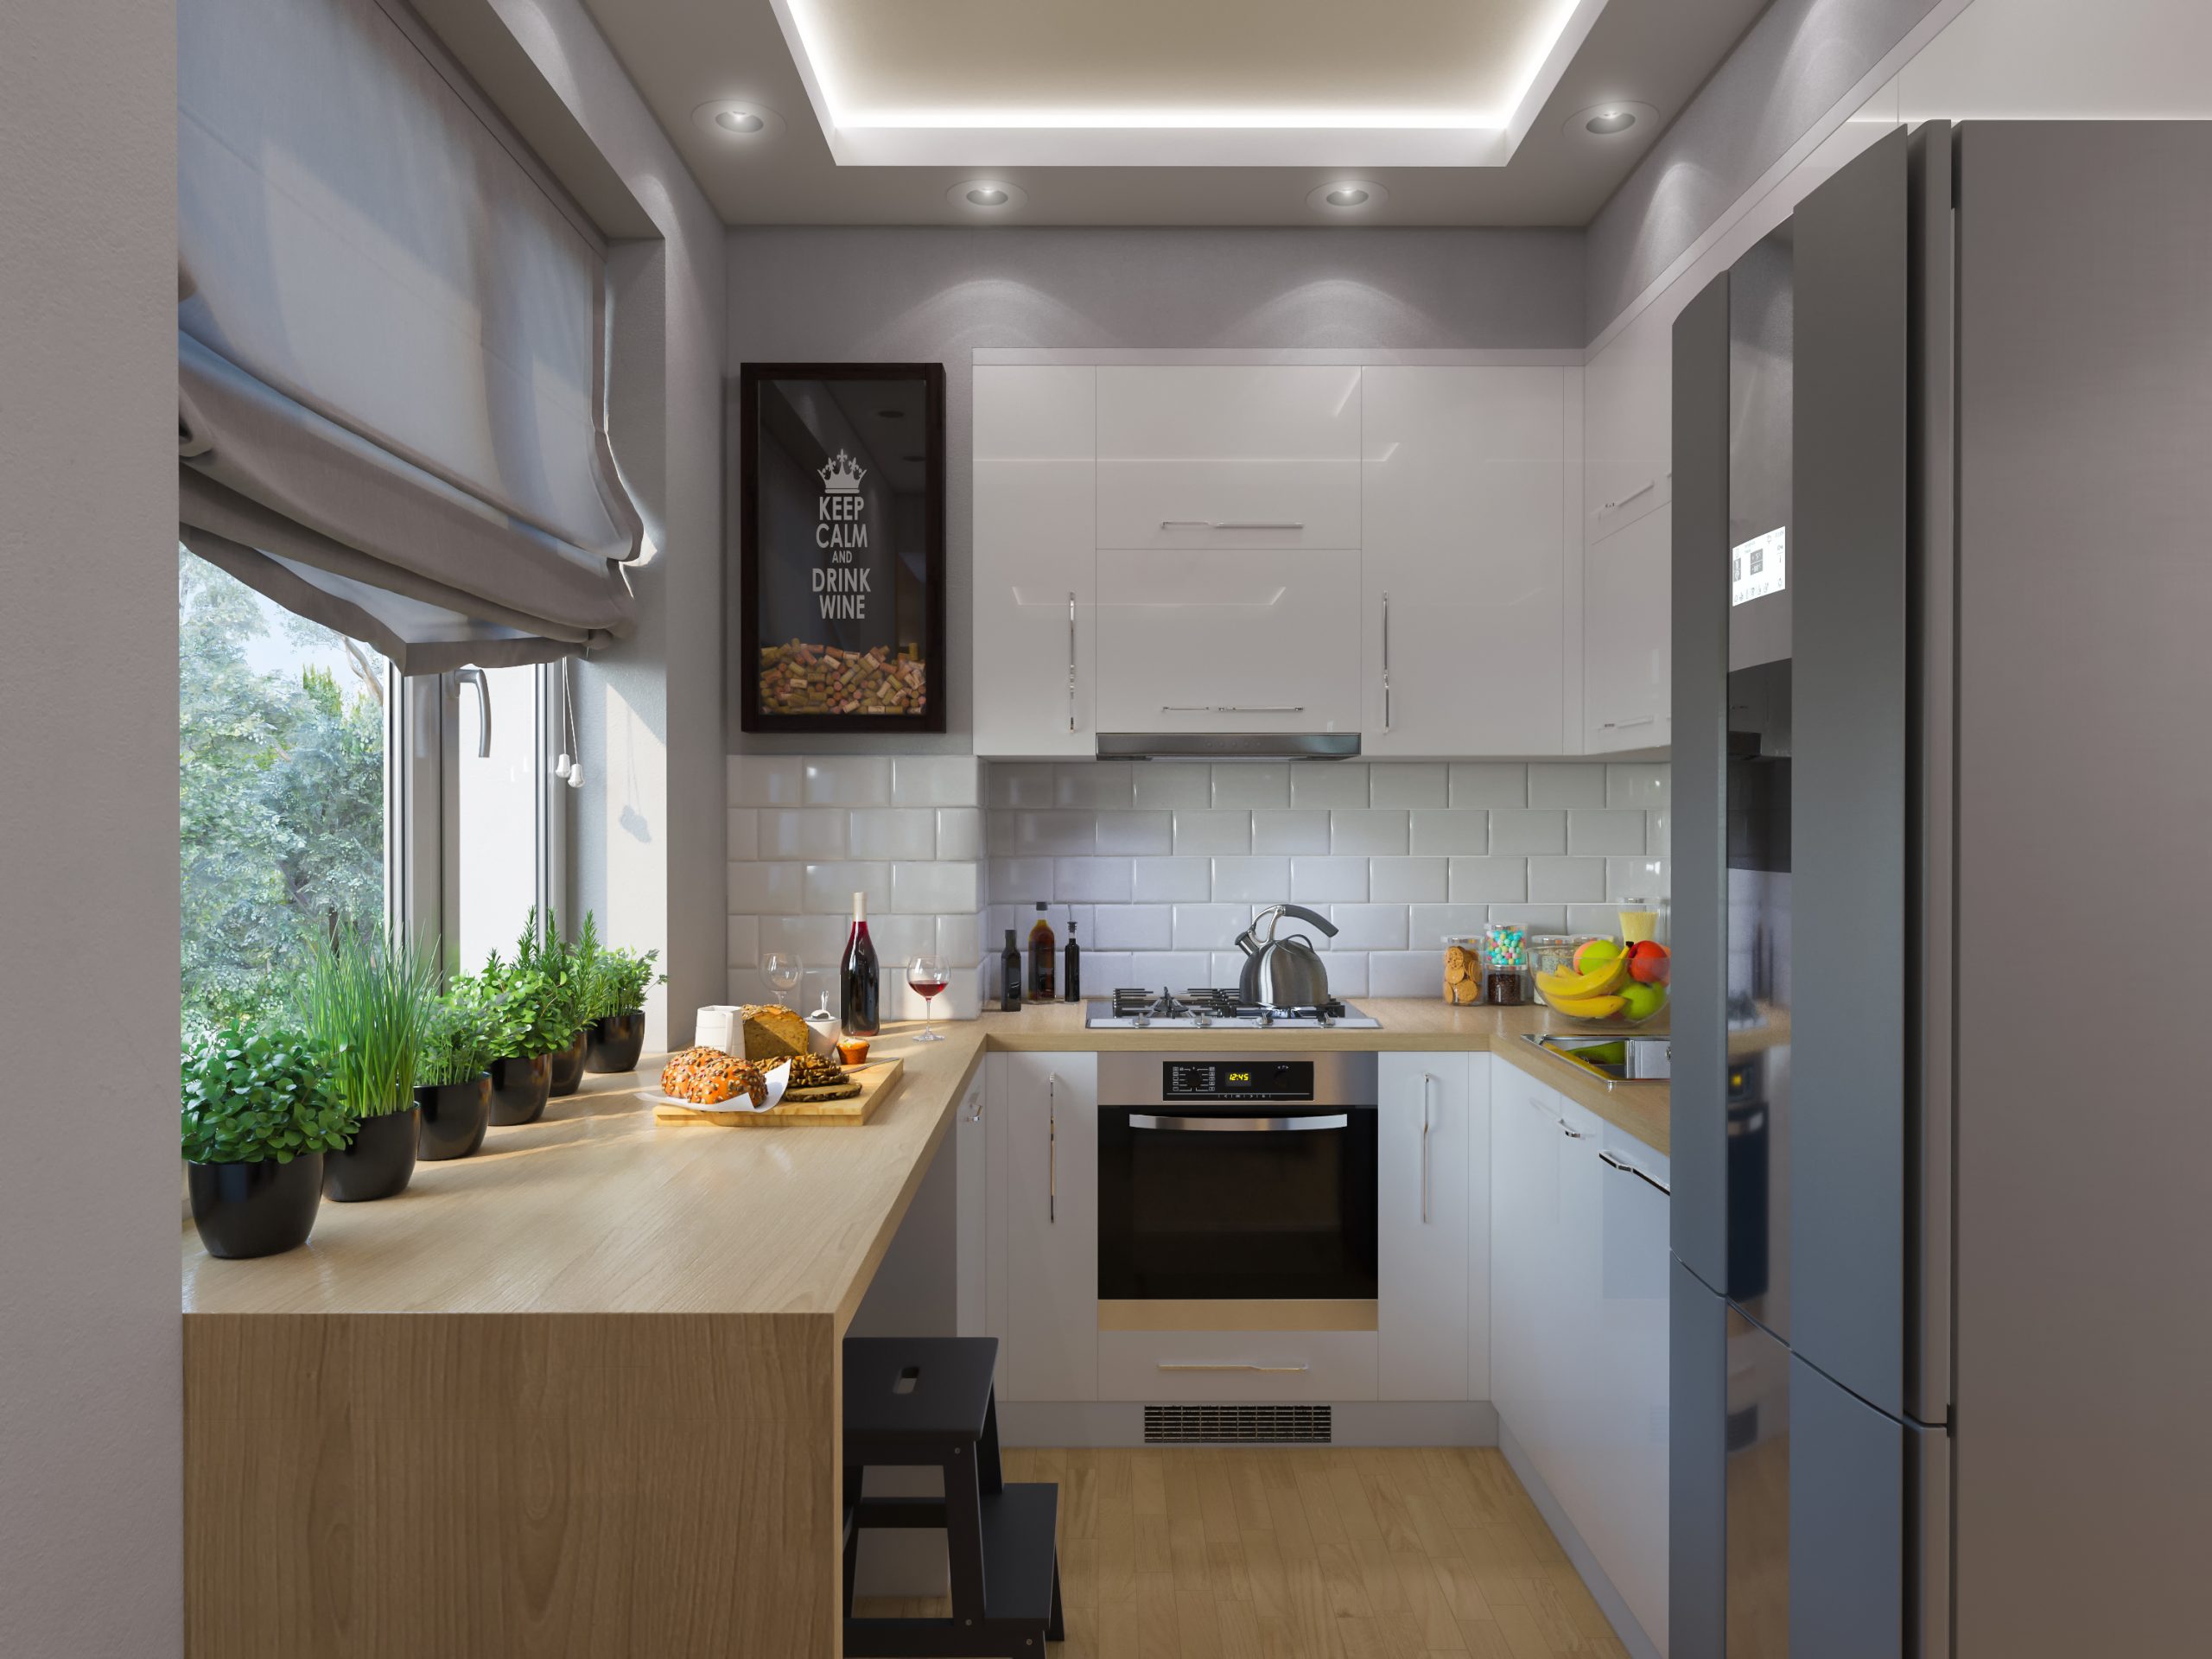 Small space, big style: Design tips for creating a handleless kitchen in a compact space